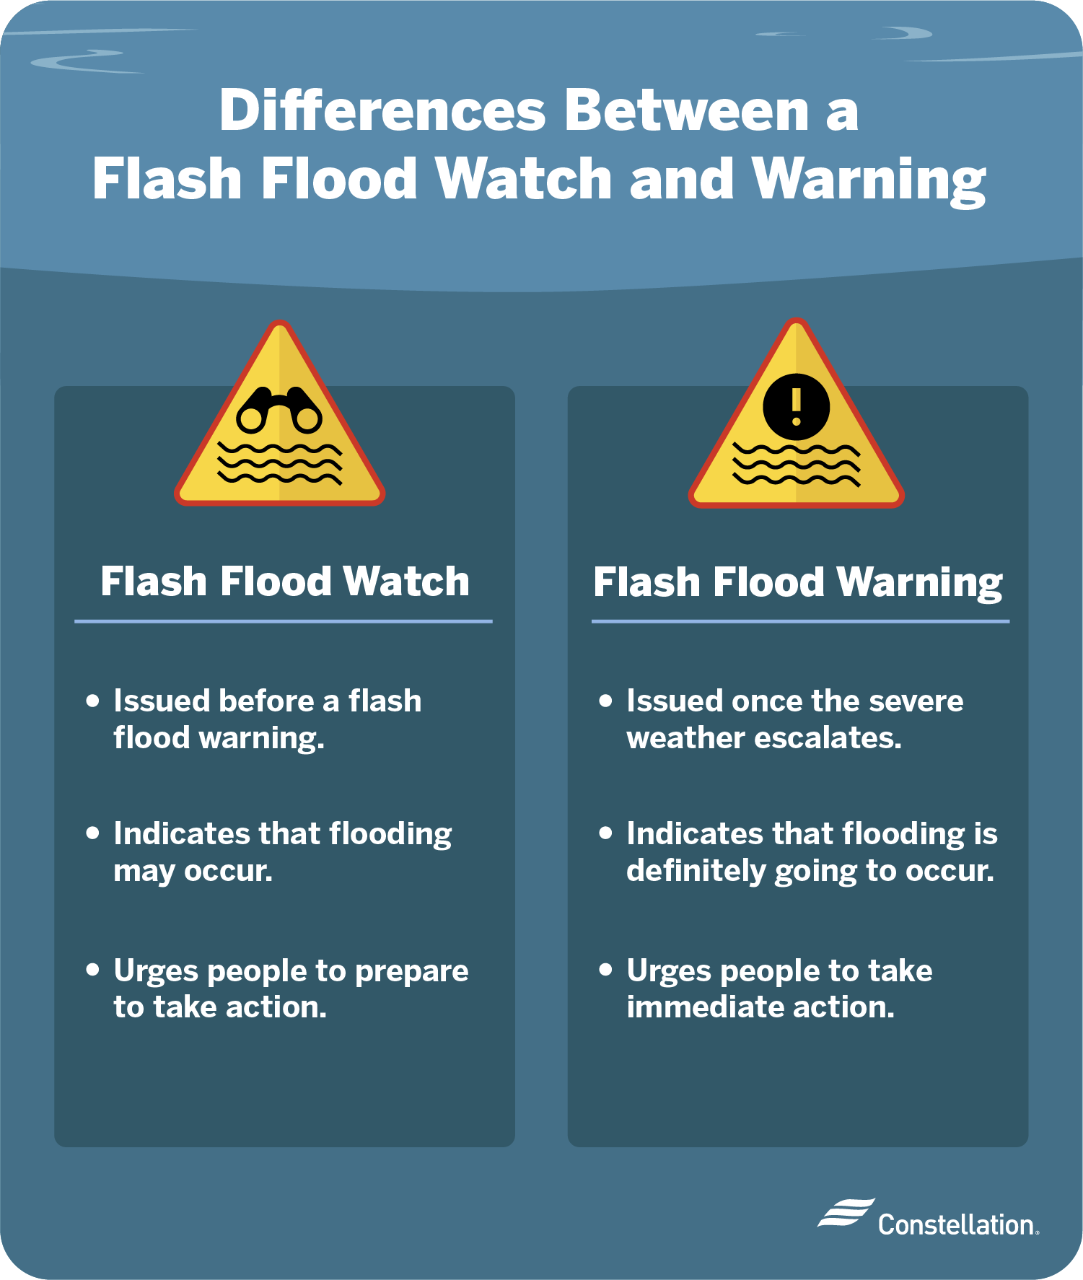 Differences between a flash flood watch and warning